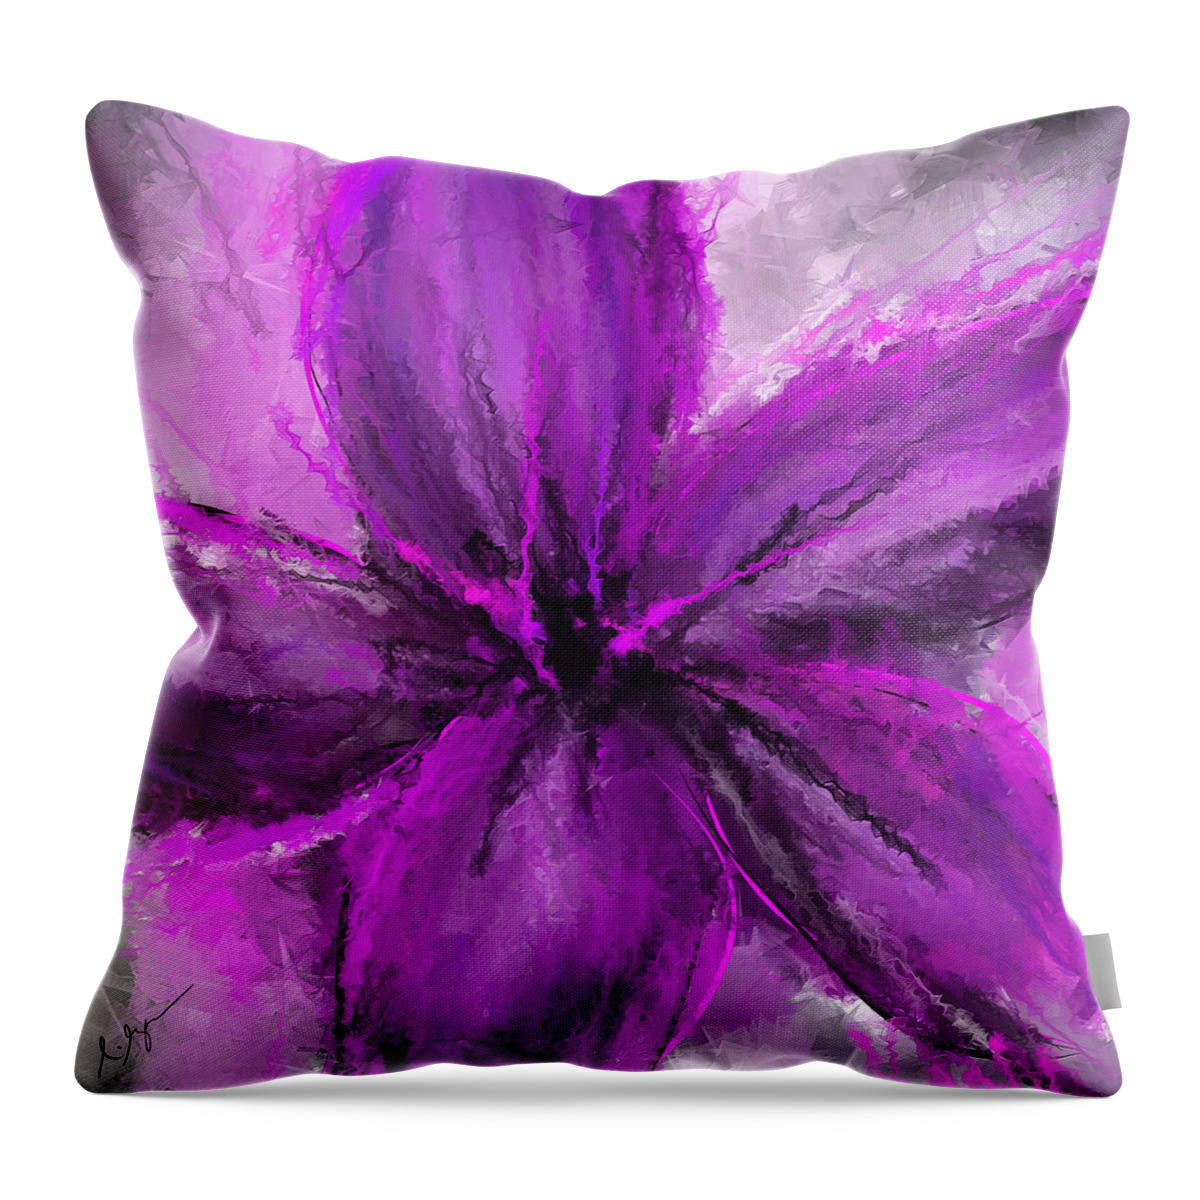 Purple Art Throw Pillow featuring the painting Purple And Gray Art by Lourry Legarde